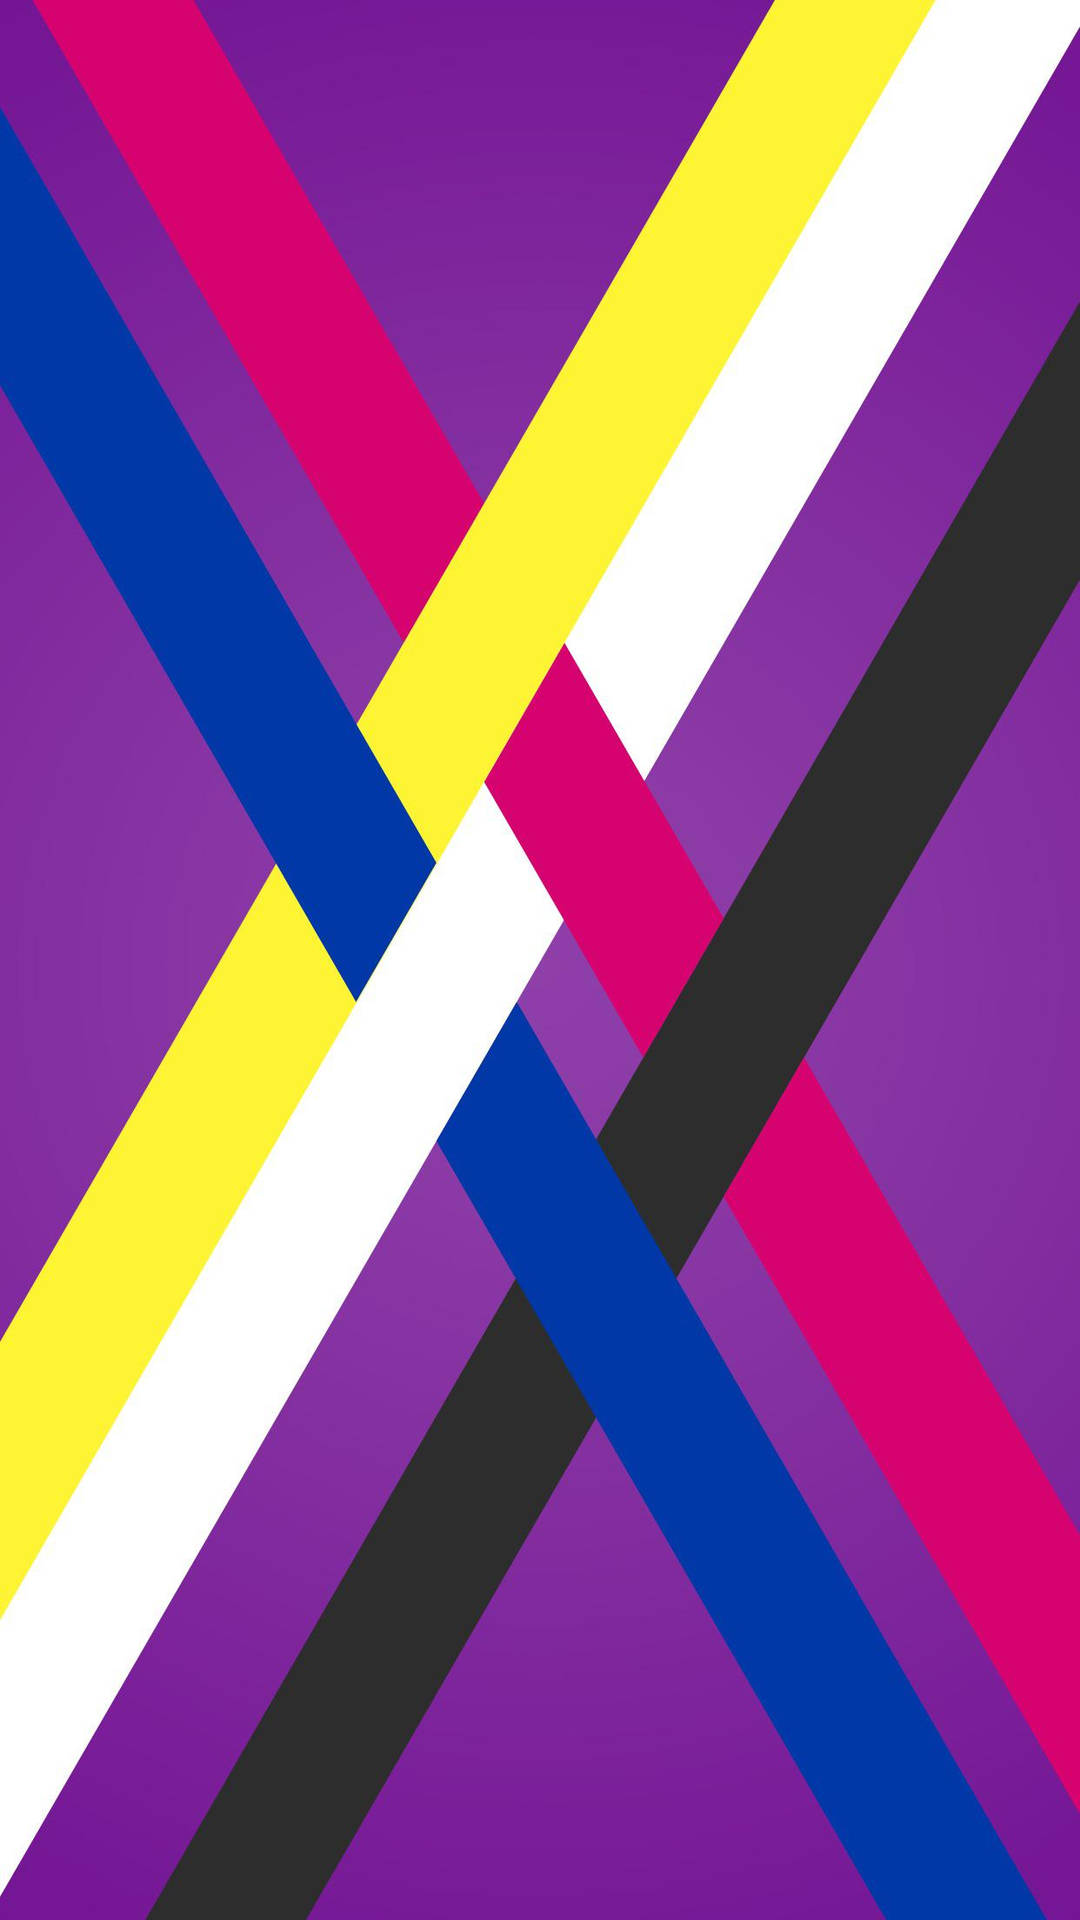 43000 Non Binary Flag Wallpaper Pictures